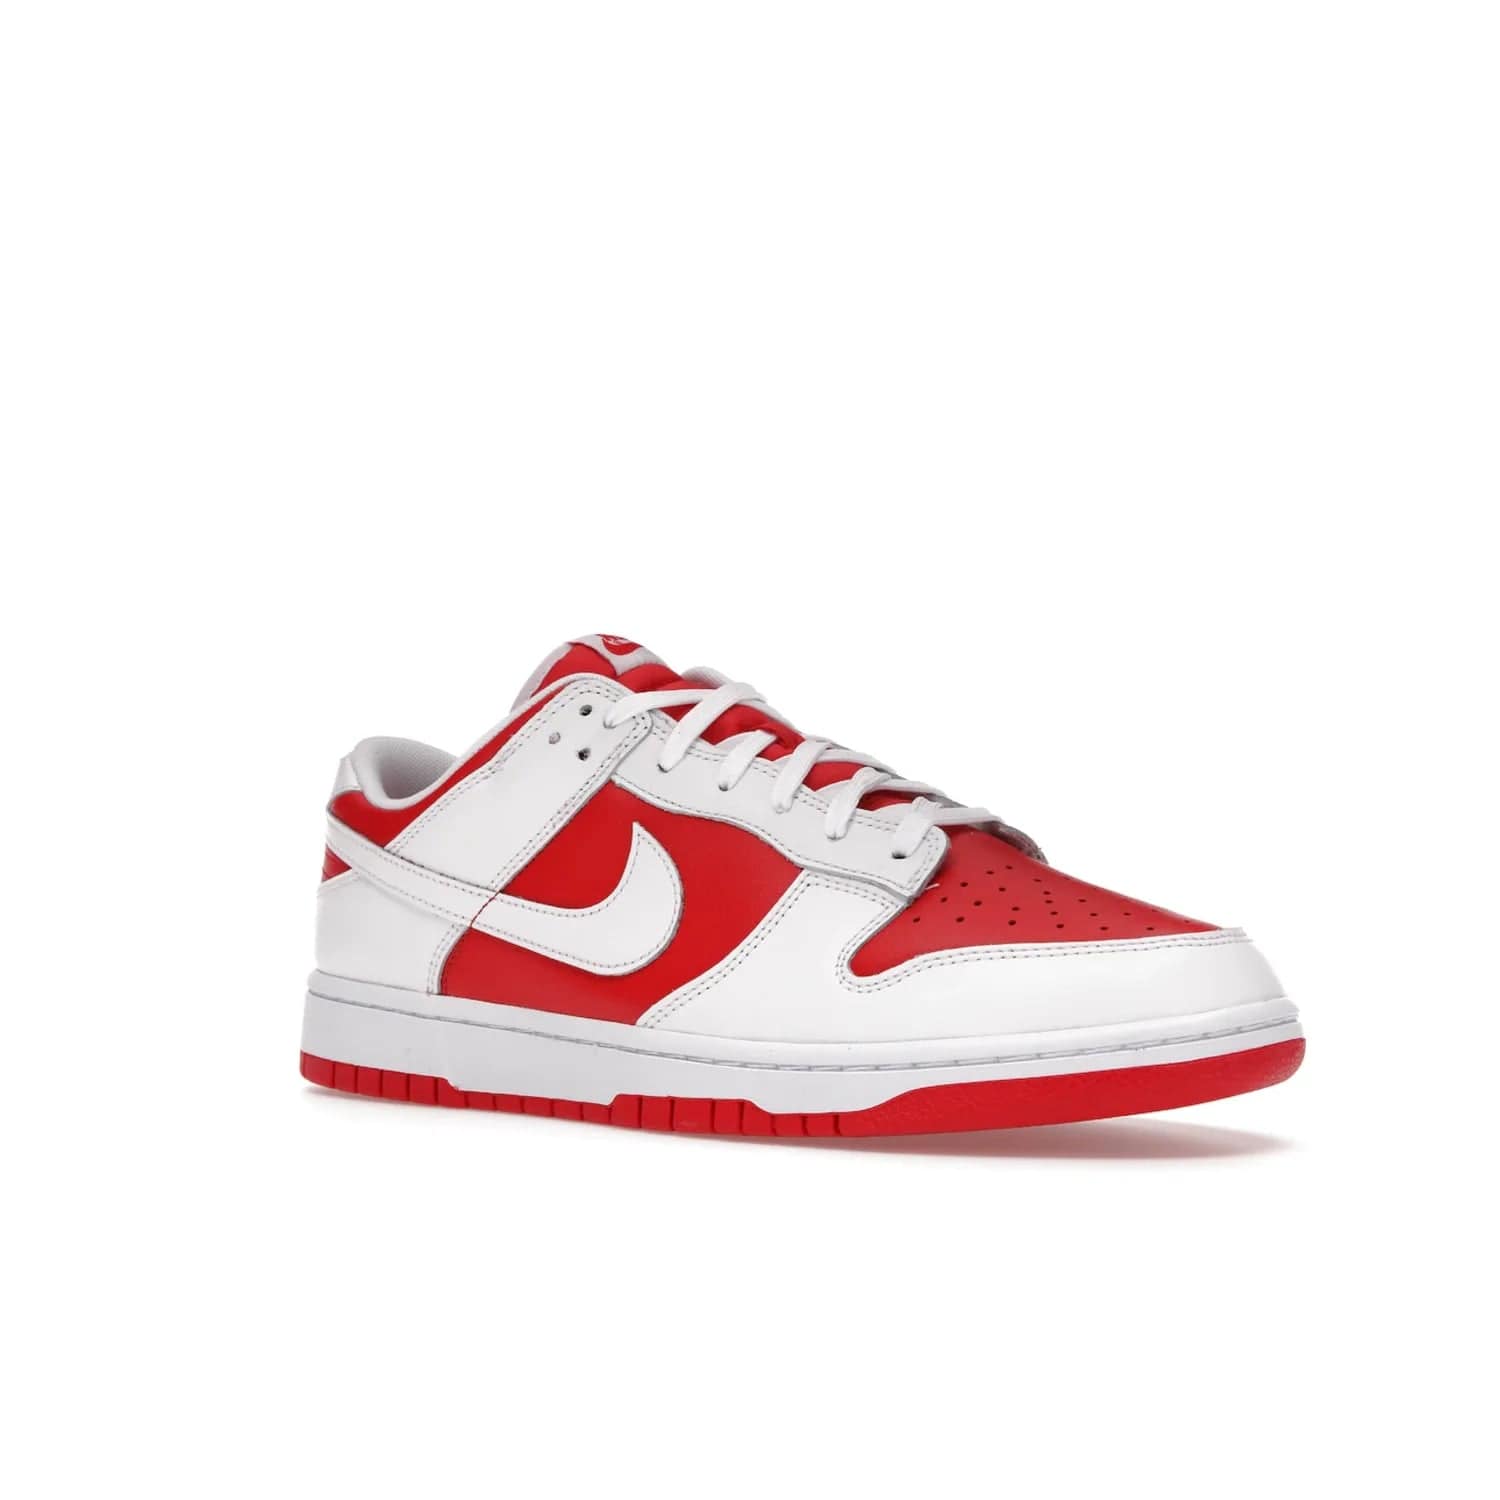 Nike Dunk Low Championship Red (2021) - Image 5 - Only at www.BallersClubKickz.com - A bold and stylish Nike Dunk Low Championship Red from 2021 with a classic retro design. University Red upper, white leather overlays and Swooshes, and a woven tongue label. Make a statement with these sleek kicks!